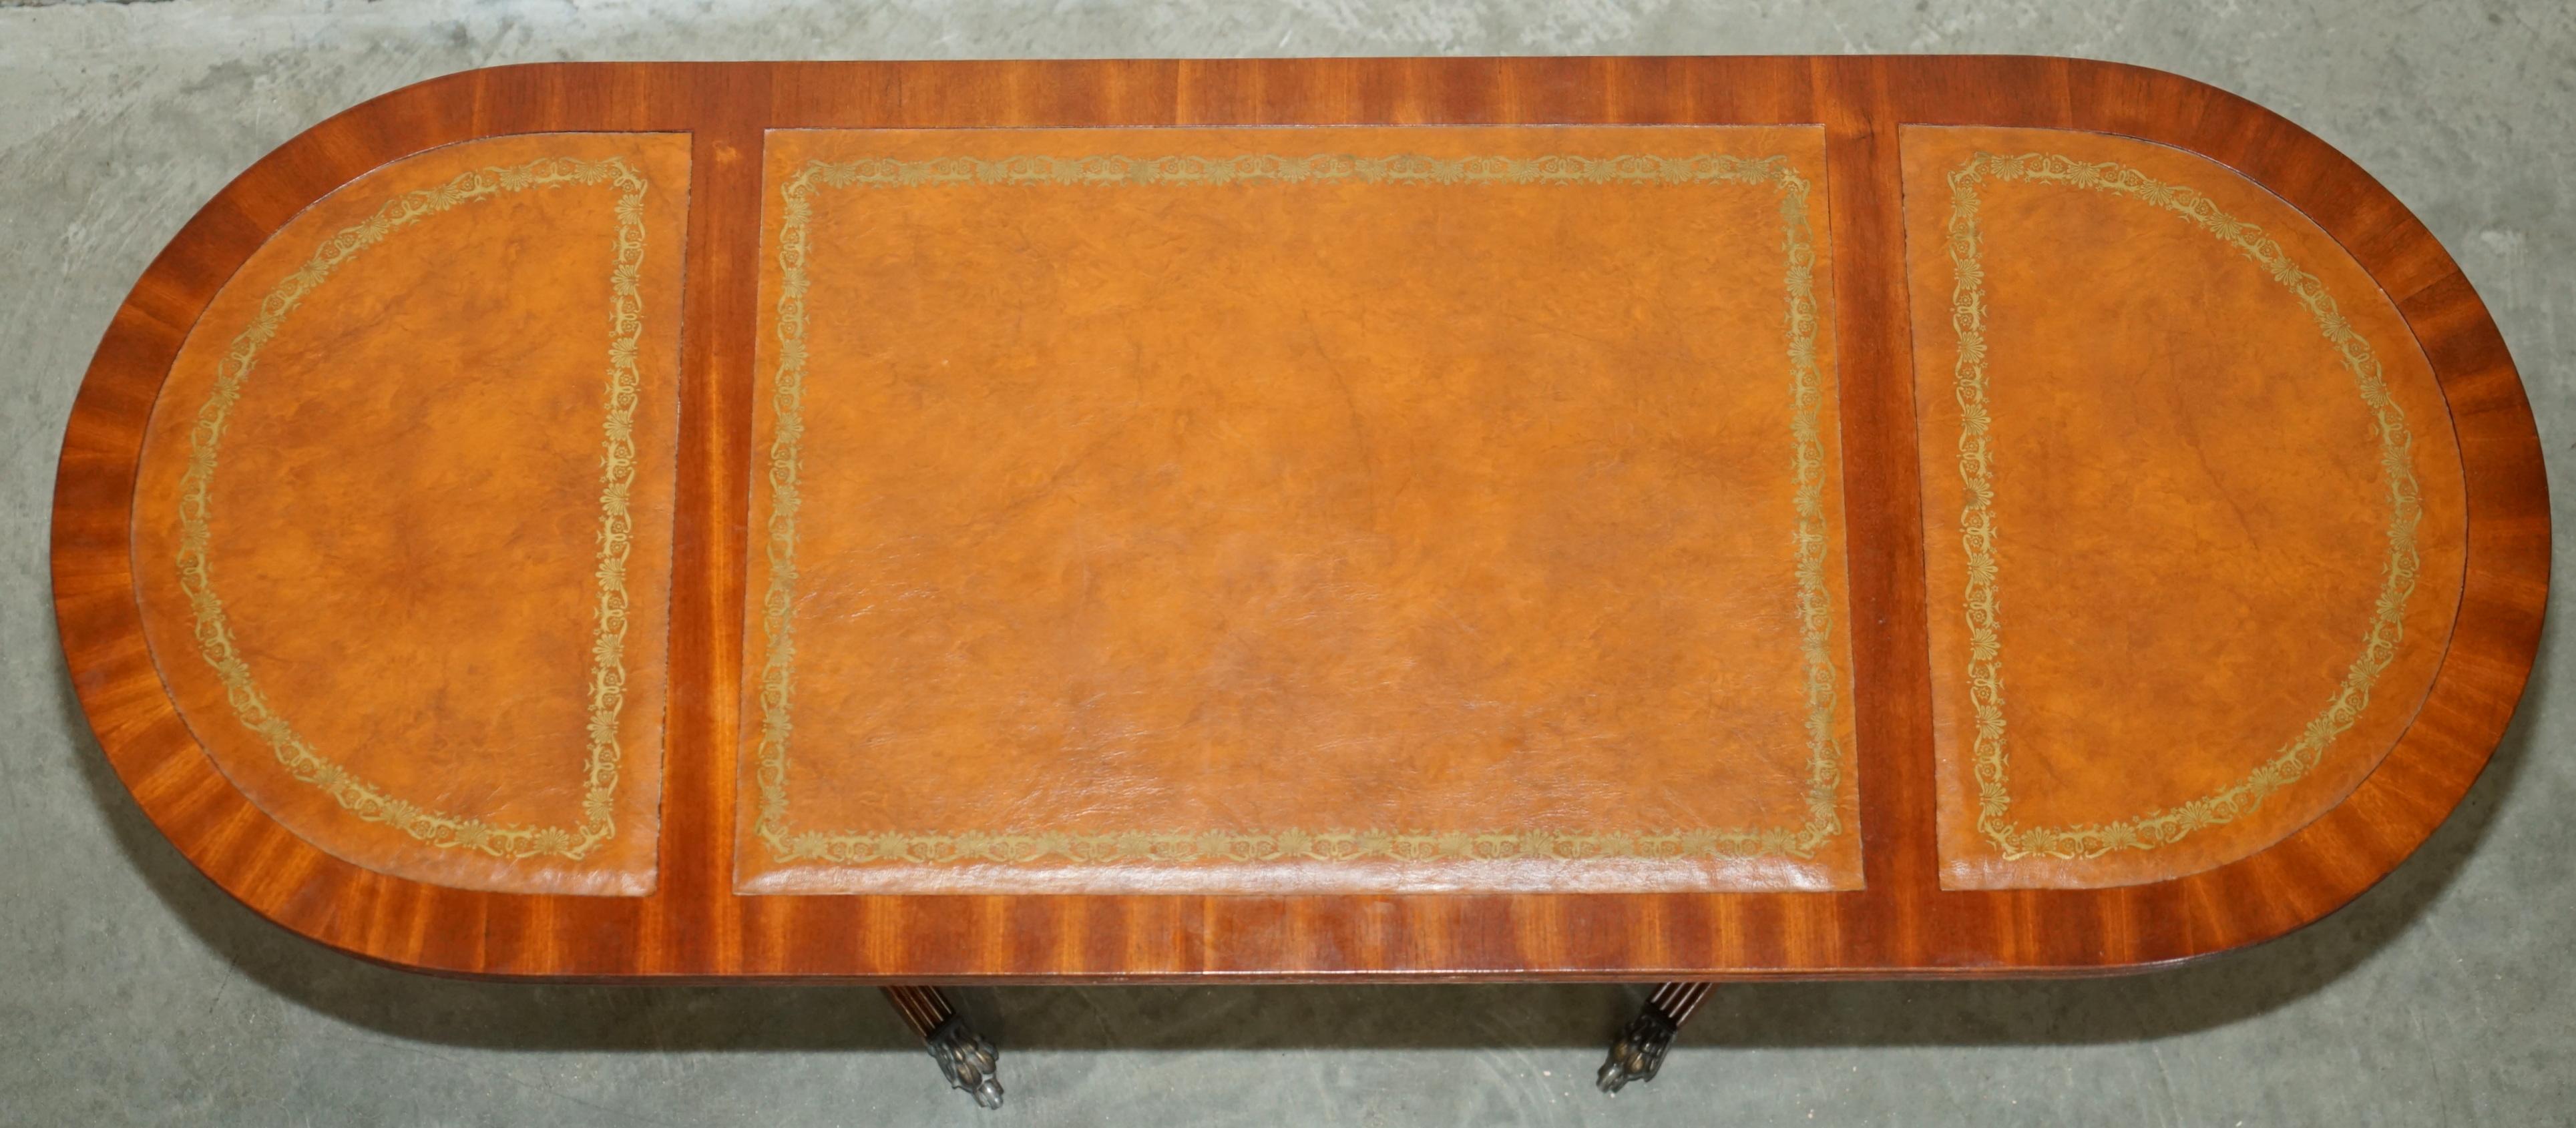 ViNTAGE HAND DYED AND AGED BROWN LEATHER OVAL COFFEE TABLE WITH LION CASTORS For Sale 10